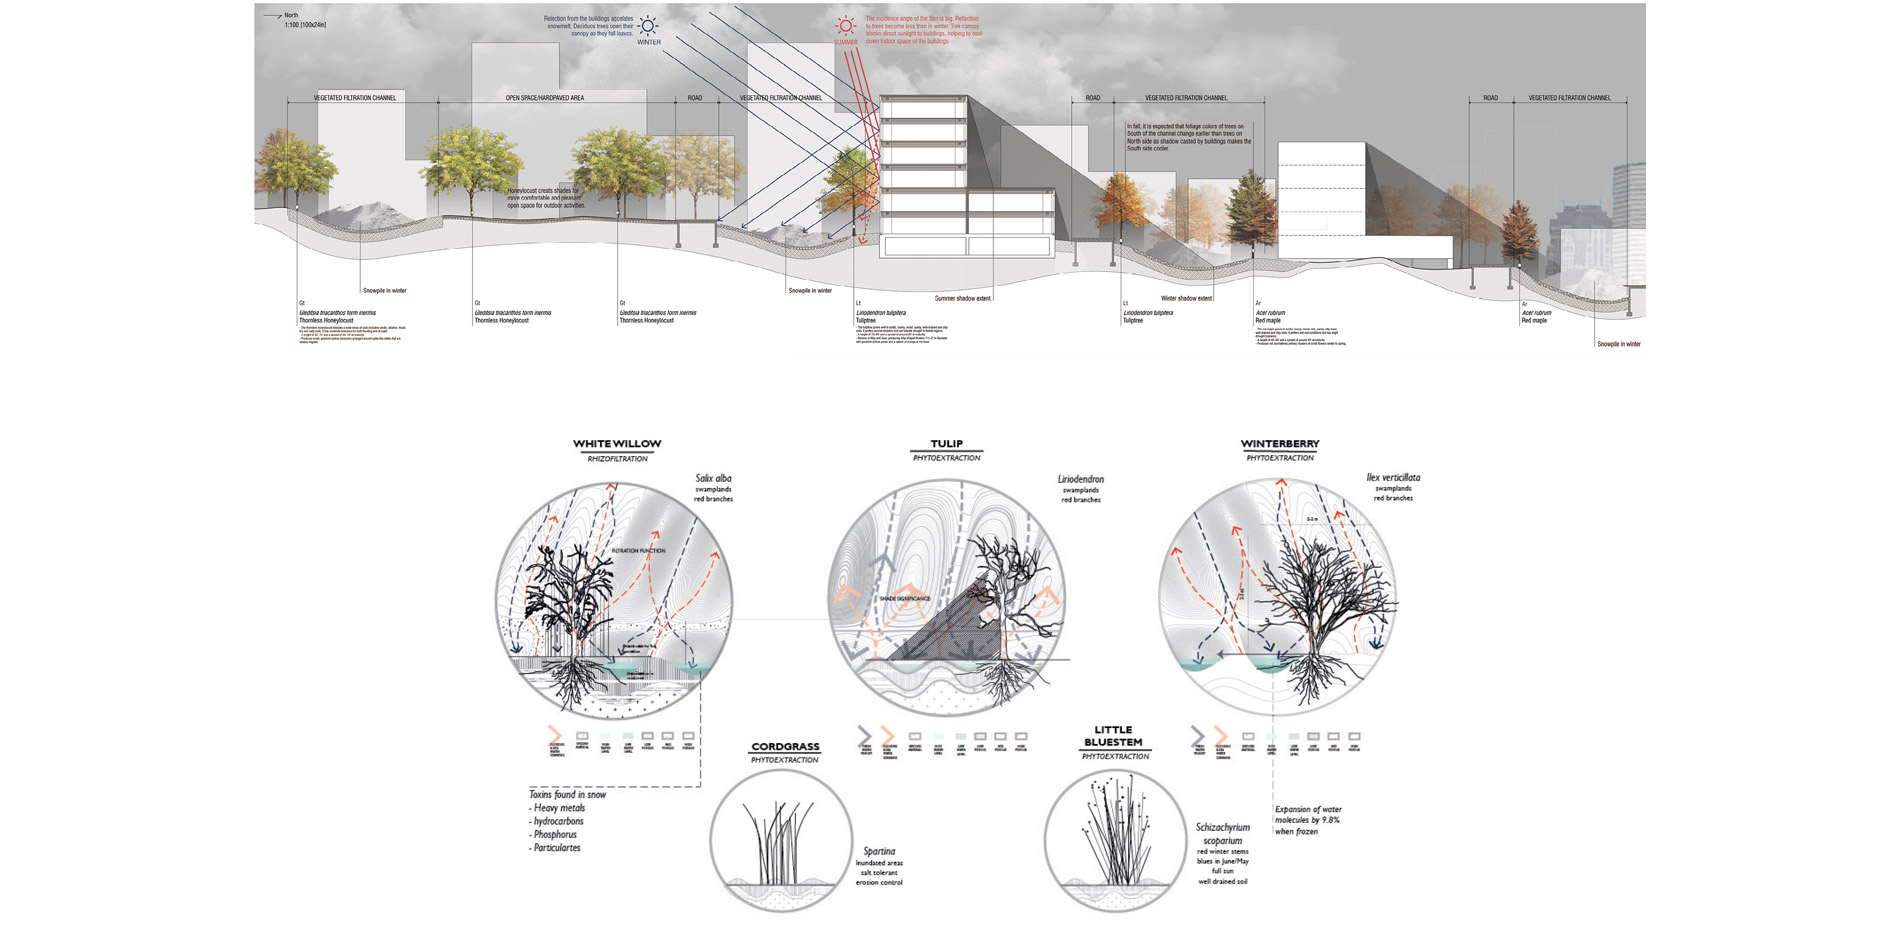 Planting zones interact with flows, site conditions and residential exterior walls. …